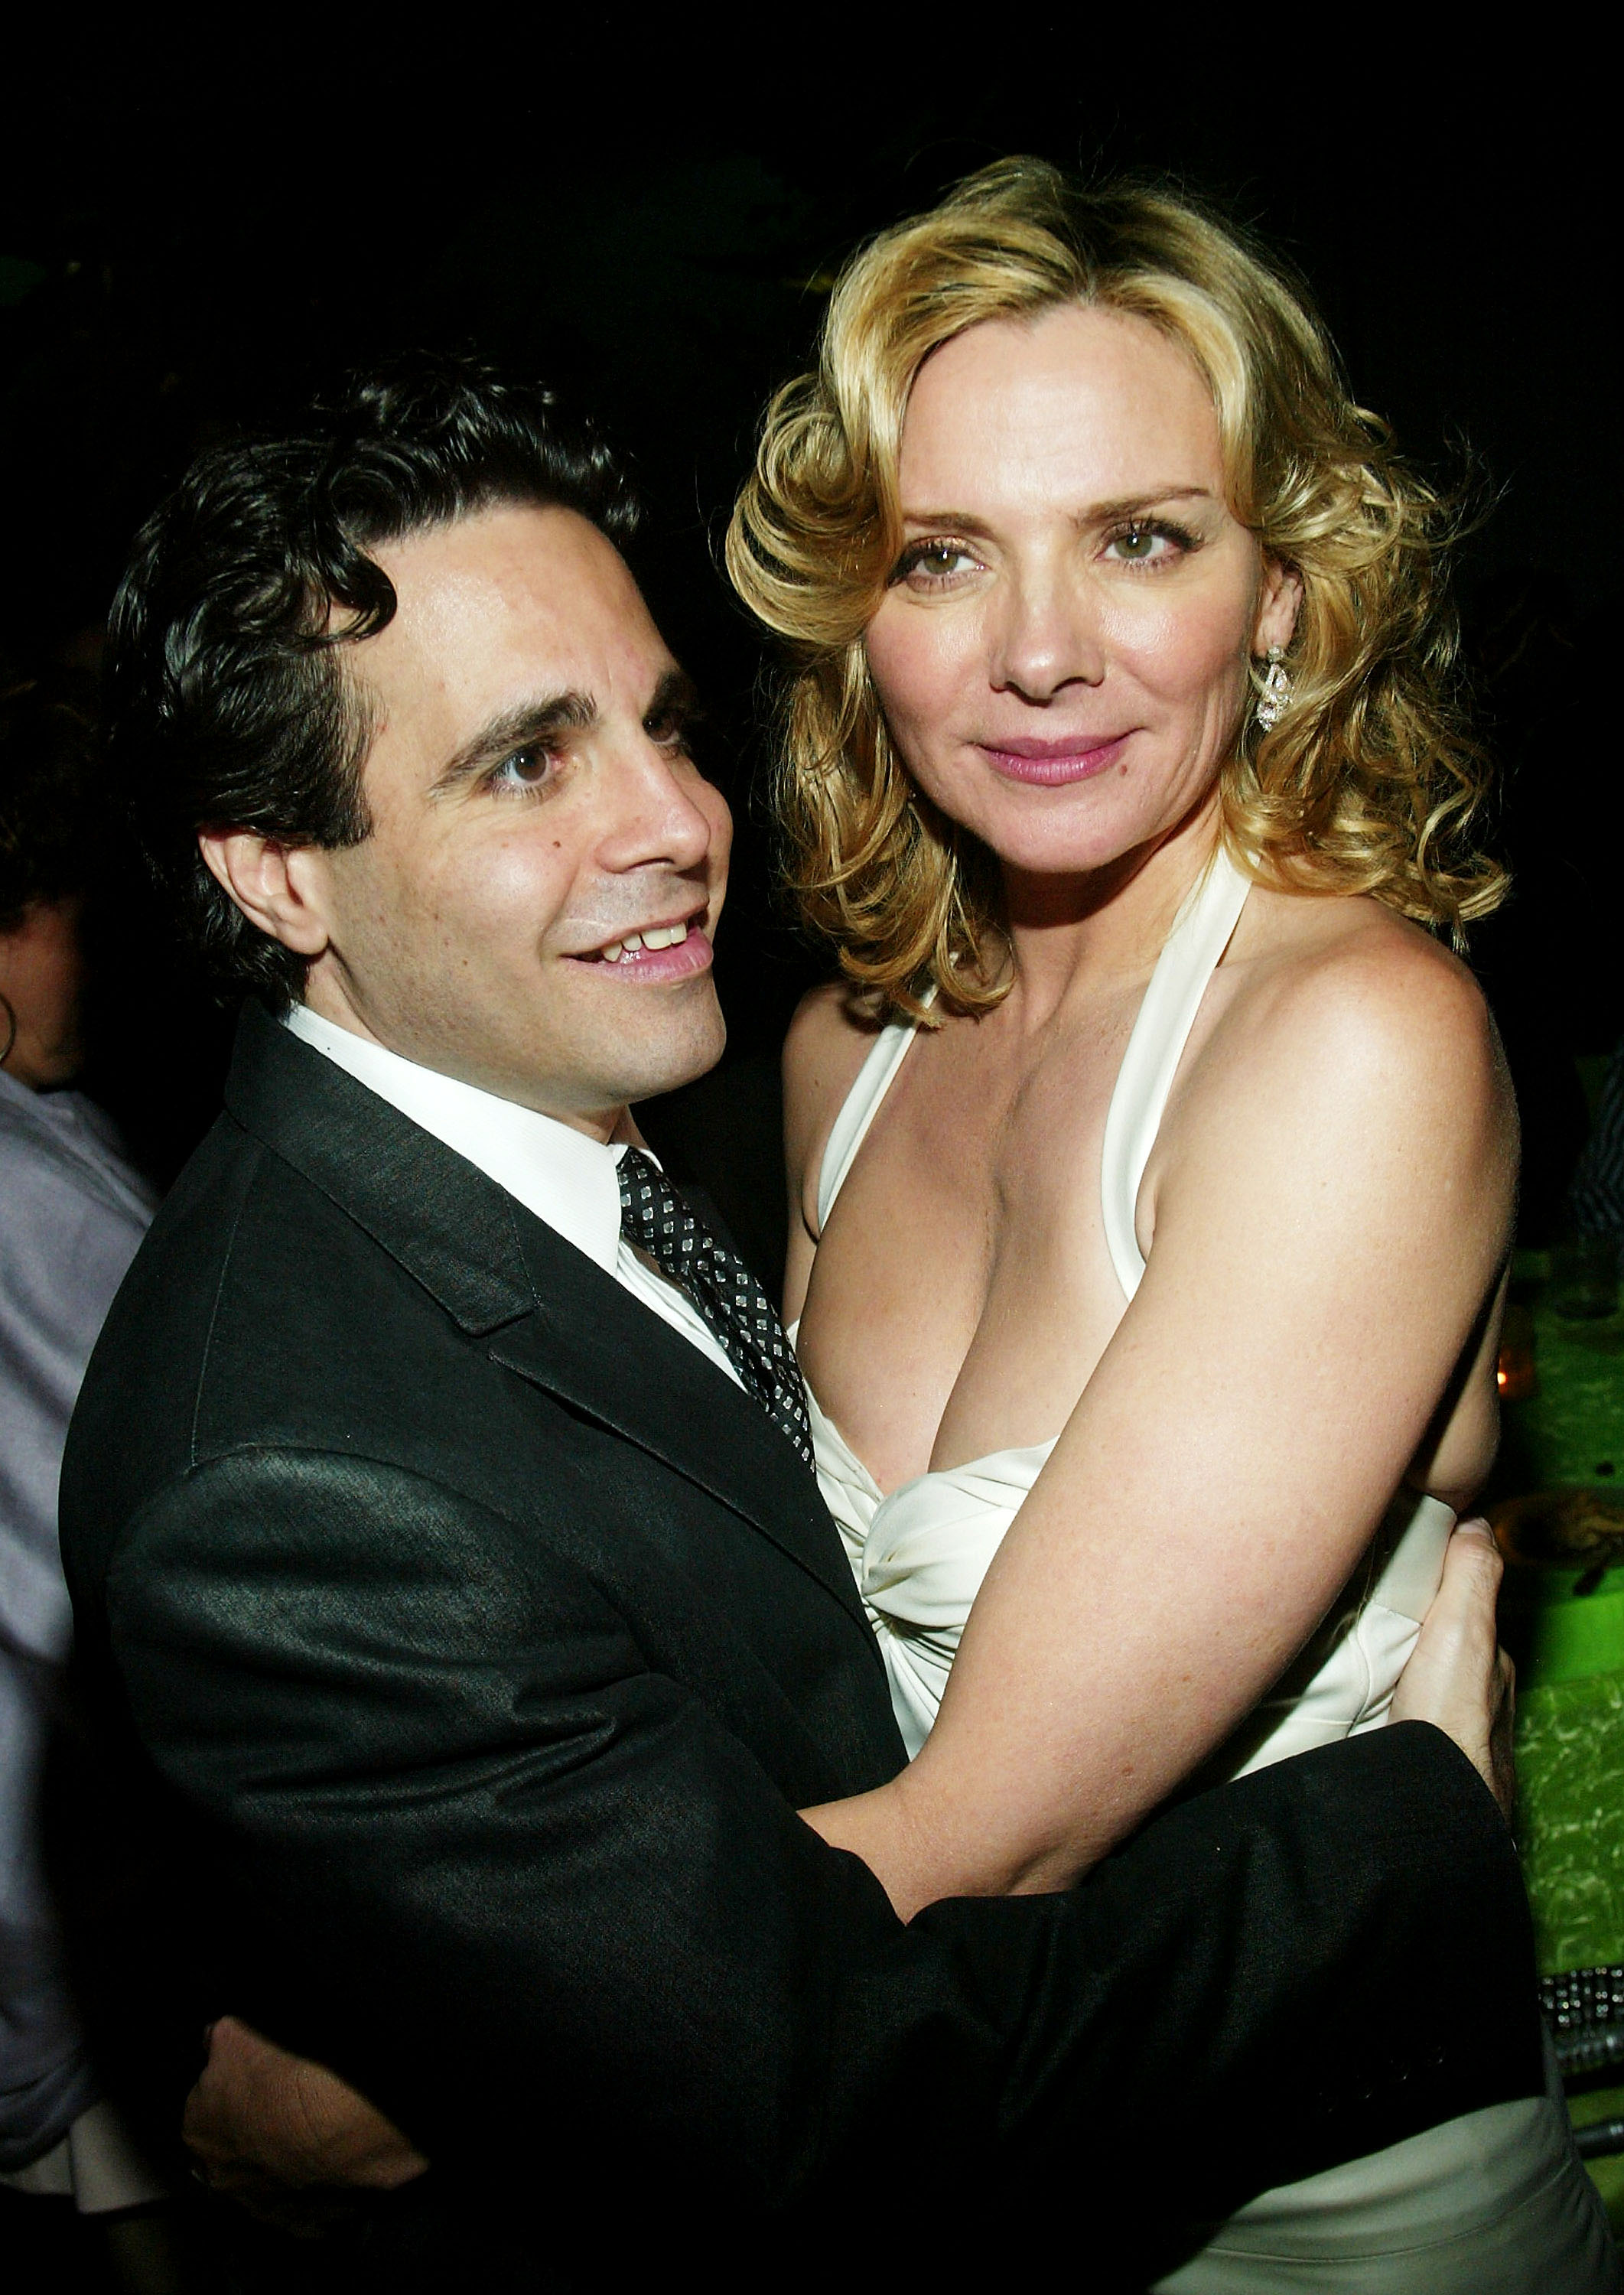 Mario Cantone and Kim Cattrall arrive at the screen of 'Sex and the City' season 5